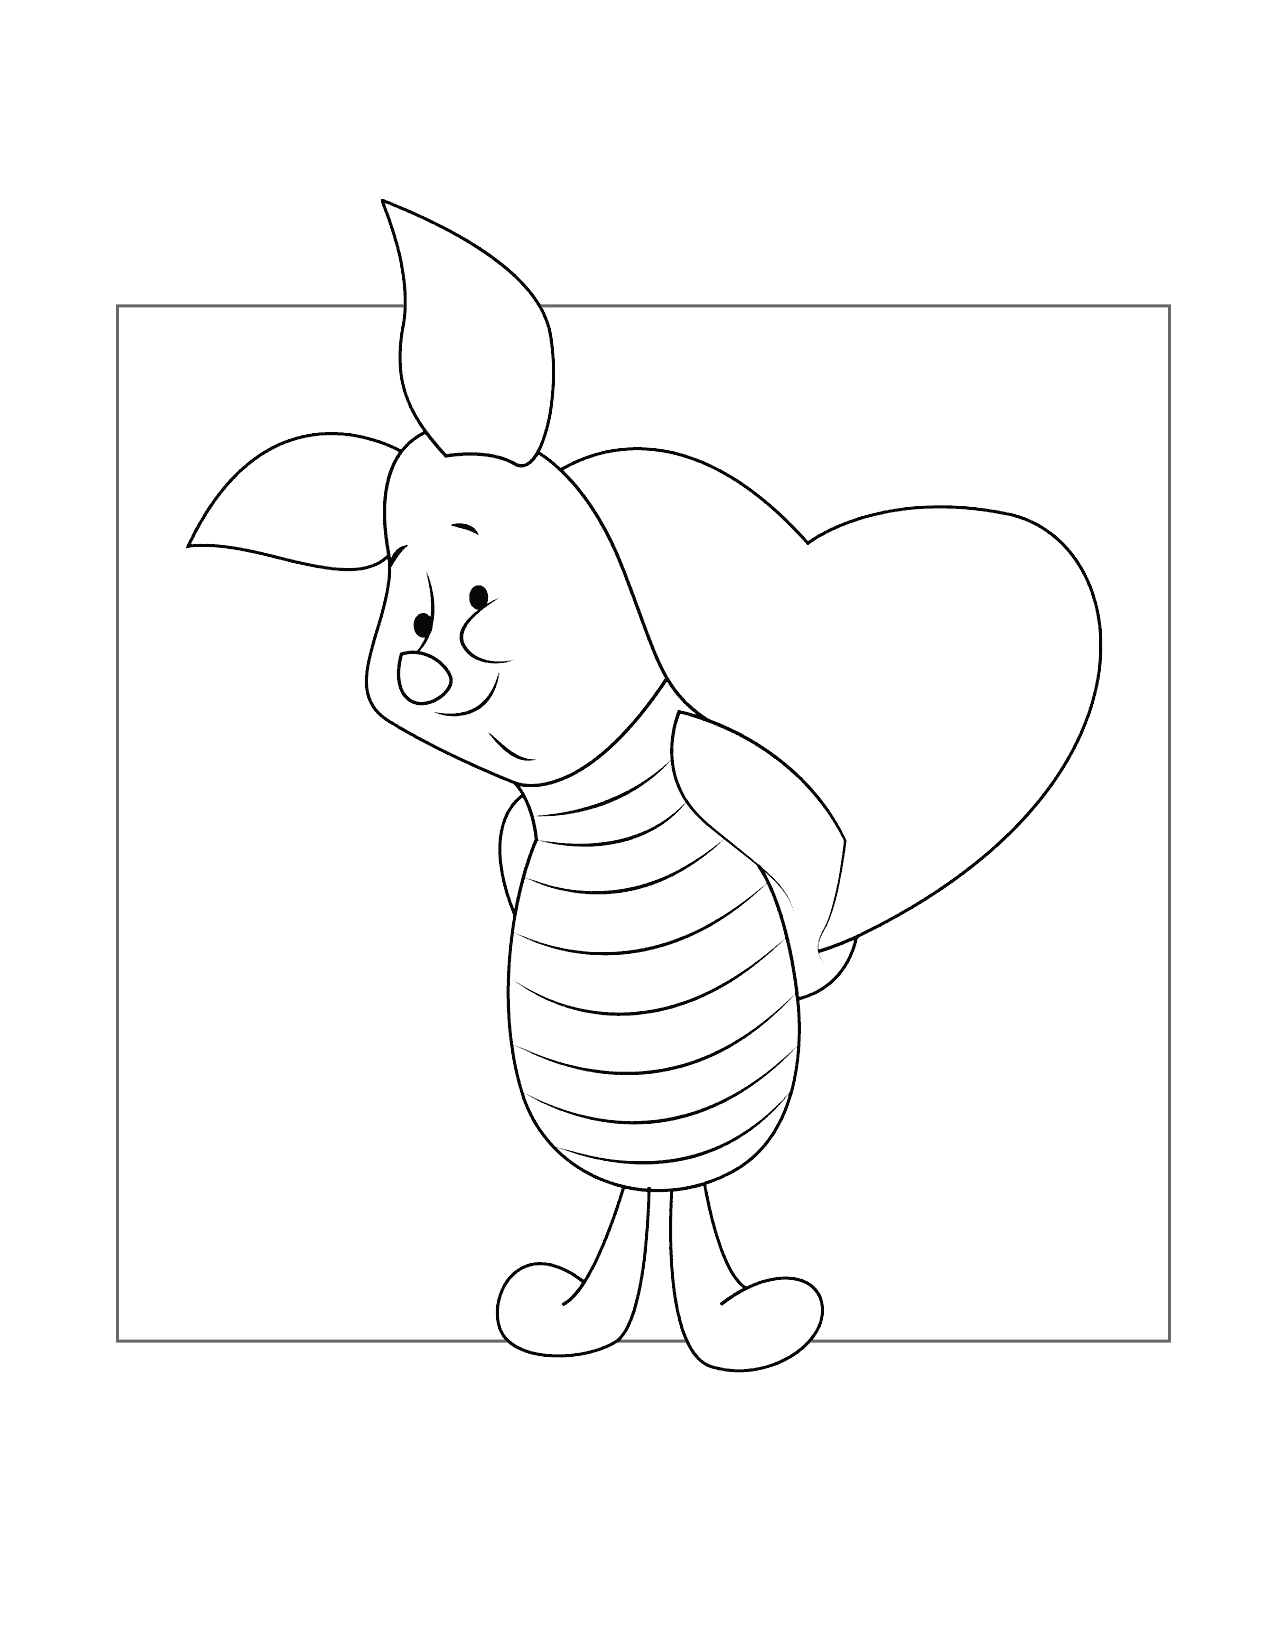 Piglet Has A Big Heart Coloring Page